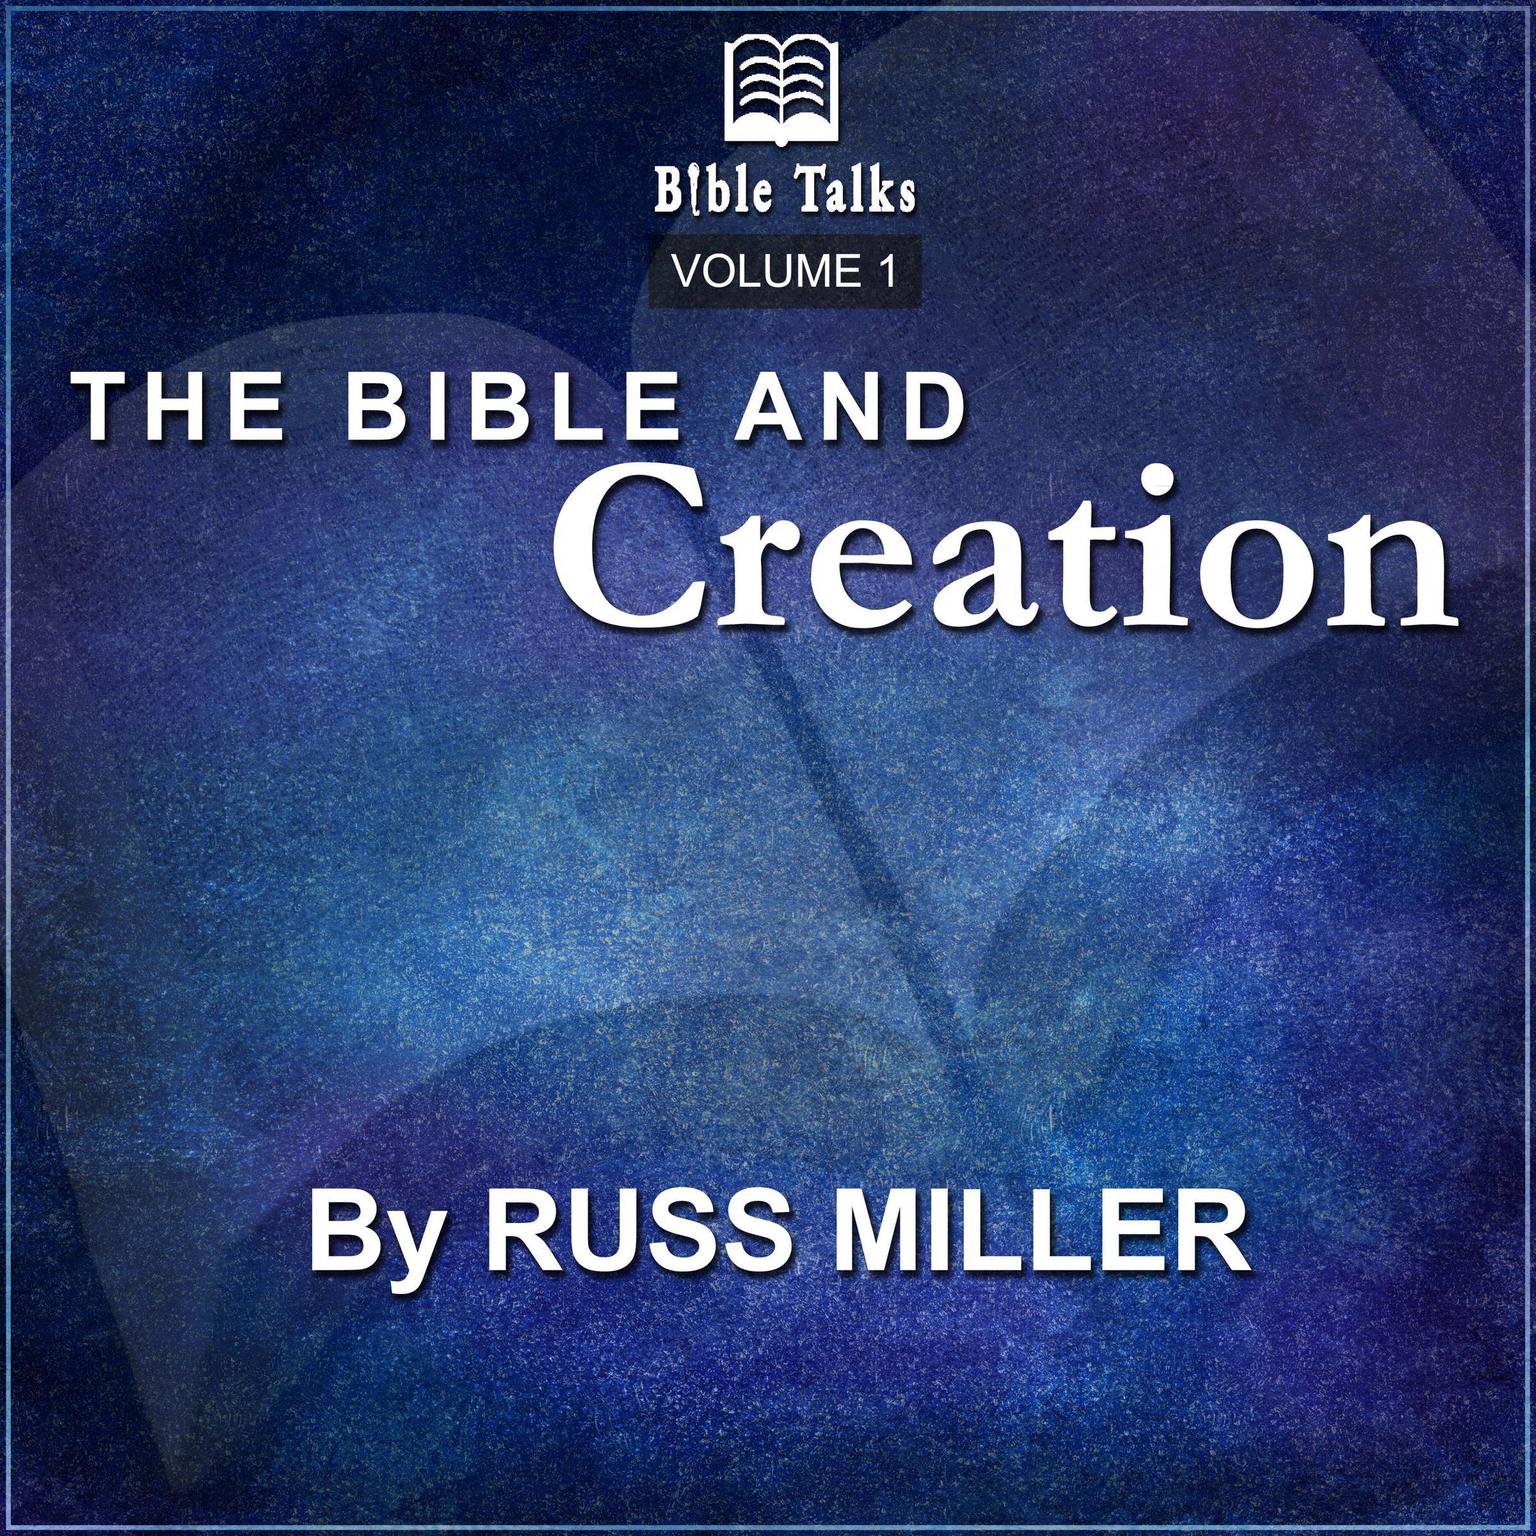 The Bible And Creation - Volume 1 Audiobook, by Russ Miller